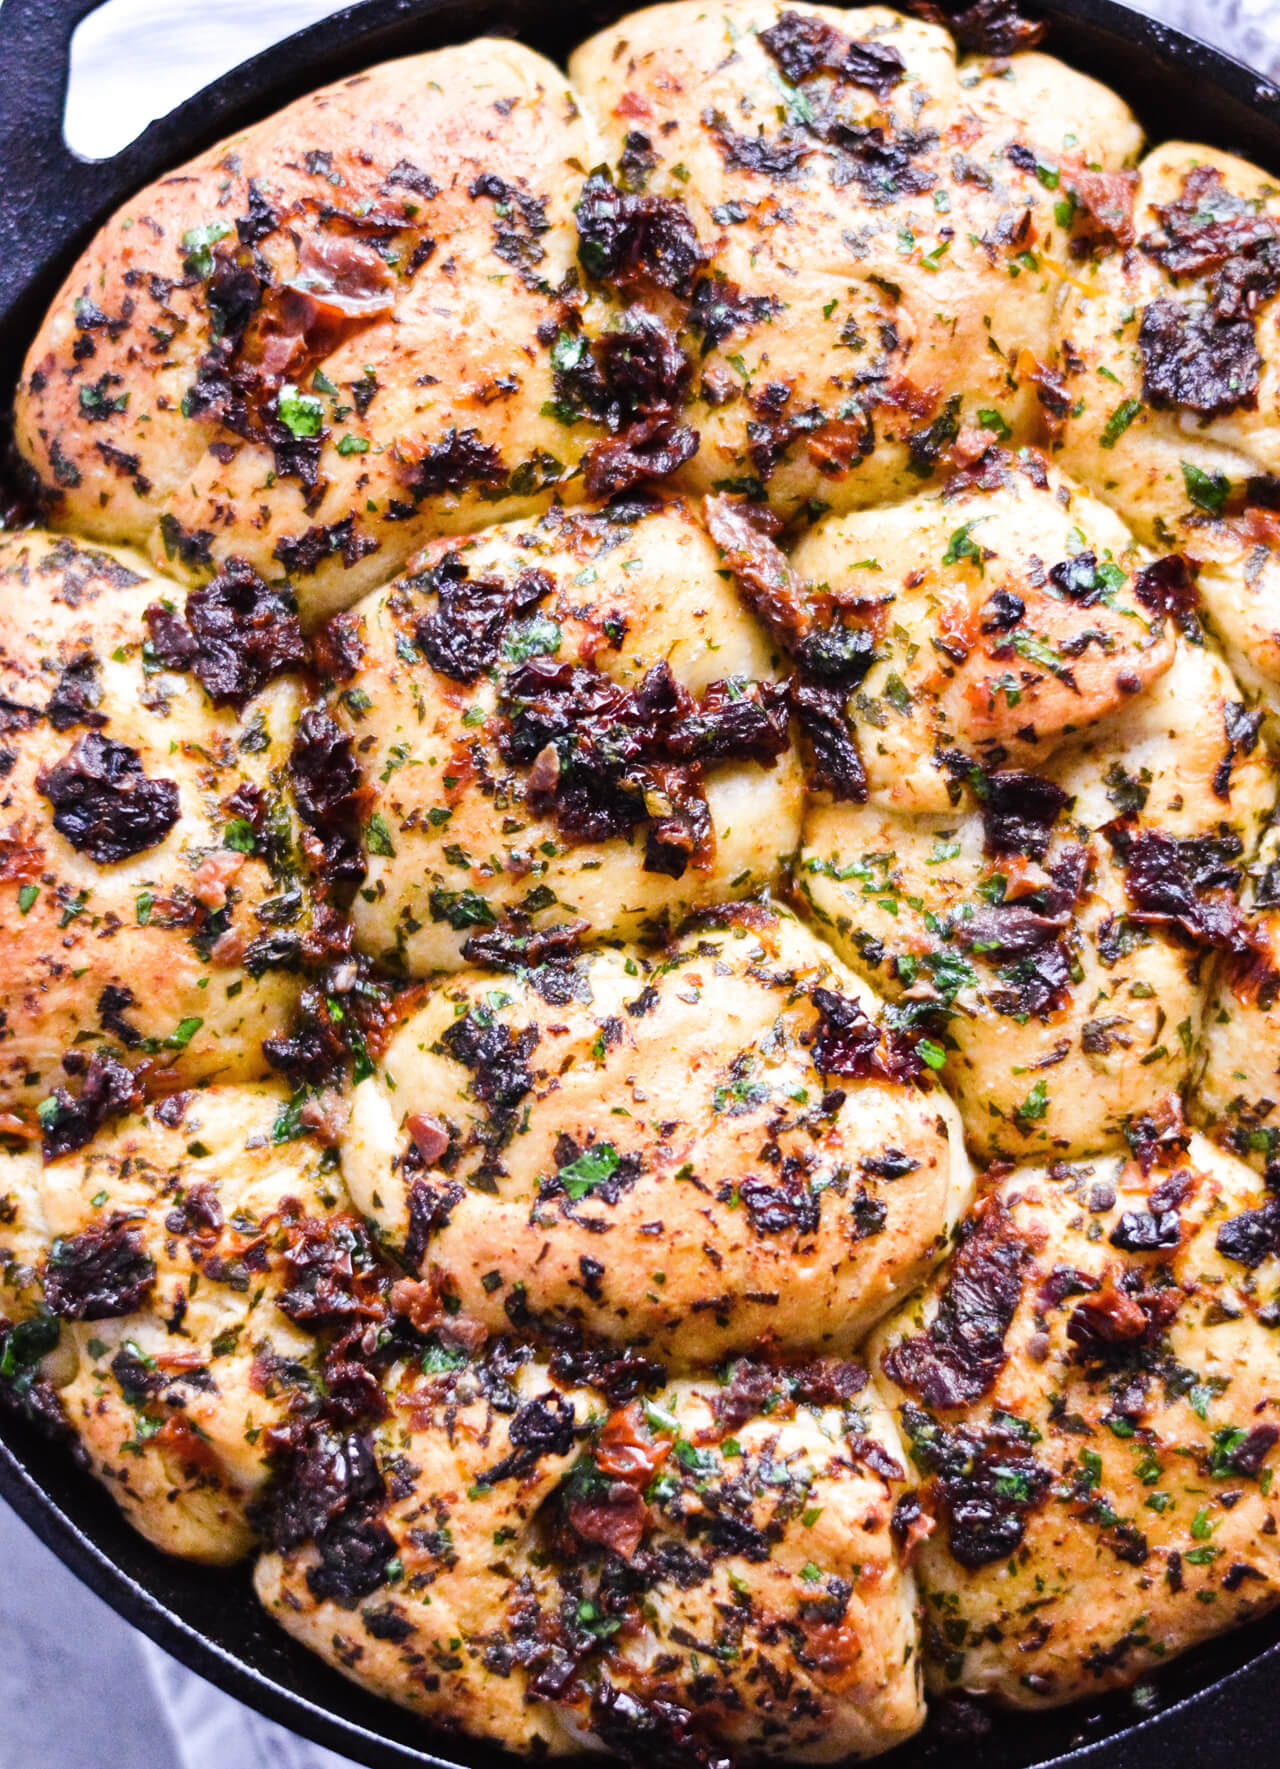 Recipe for sun-dried tomato herb skillet rolls. Dough infused with oregano and rolls drenched with parsley butter and sun-dried tomatoes. Soft, individual rolls straight from the skillet, great for the holiday dinner table. | sugarsalted.com